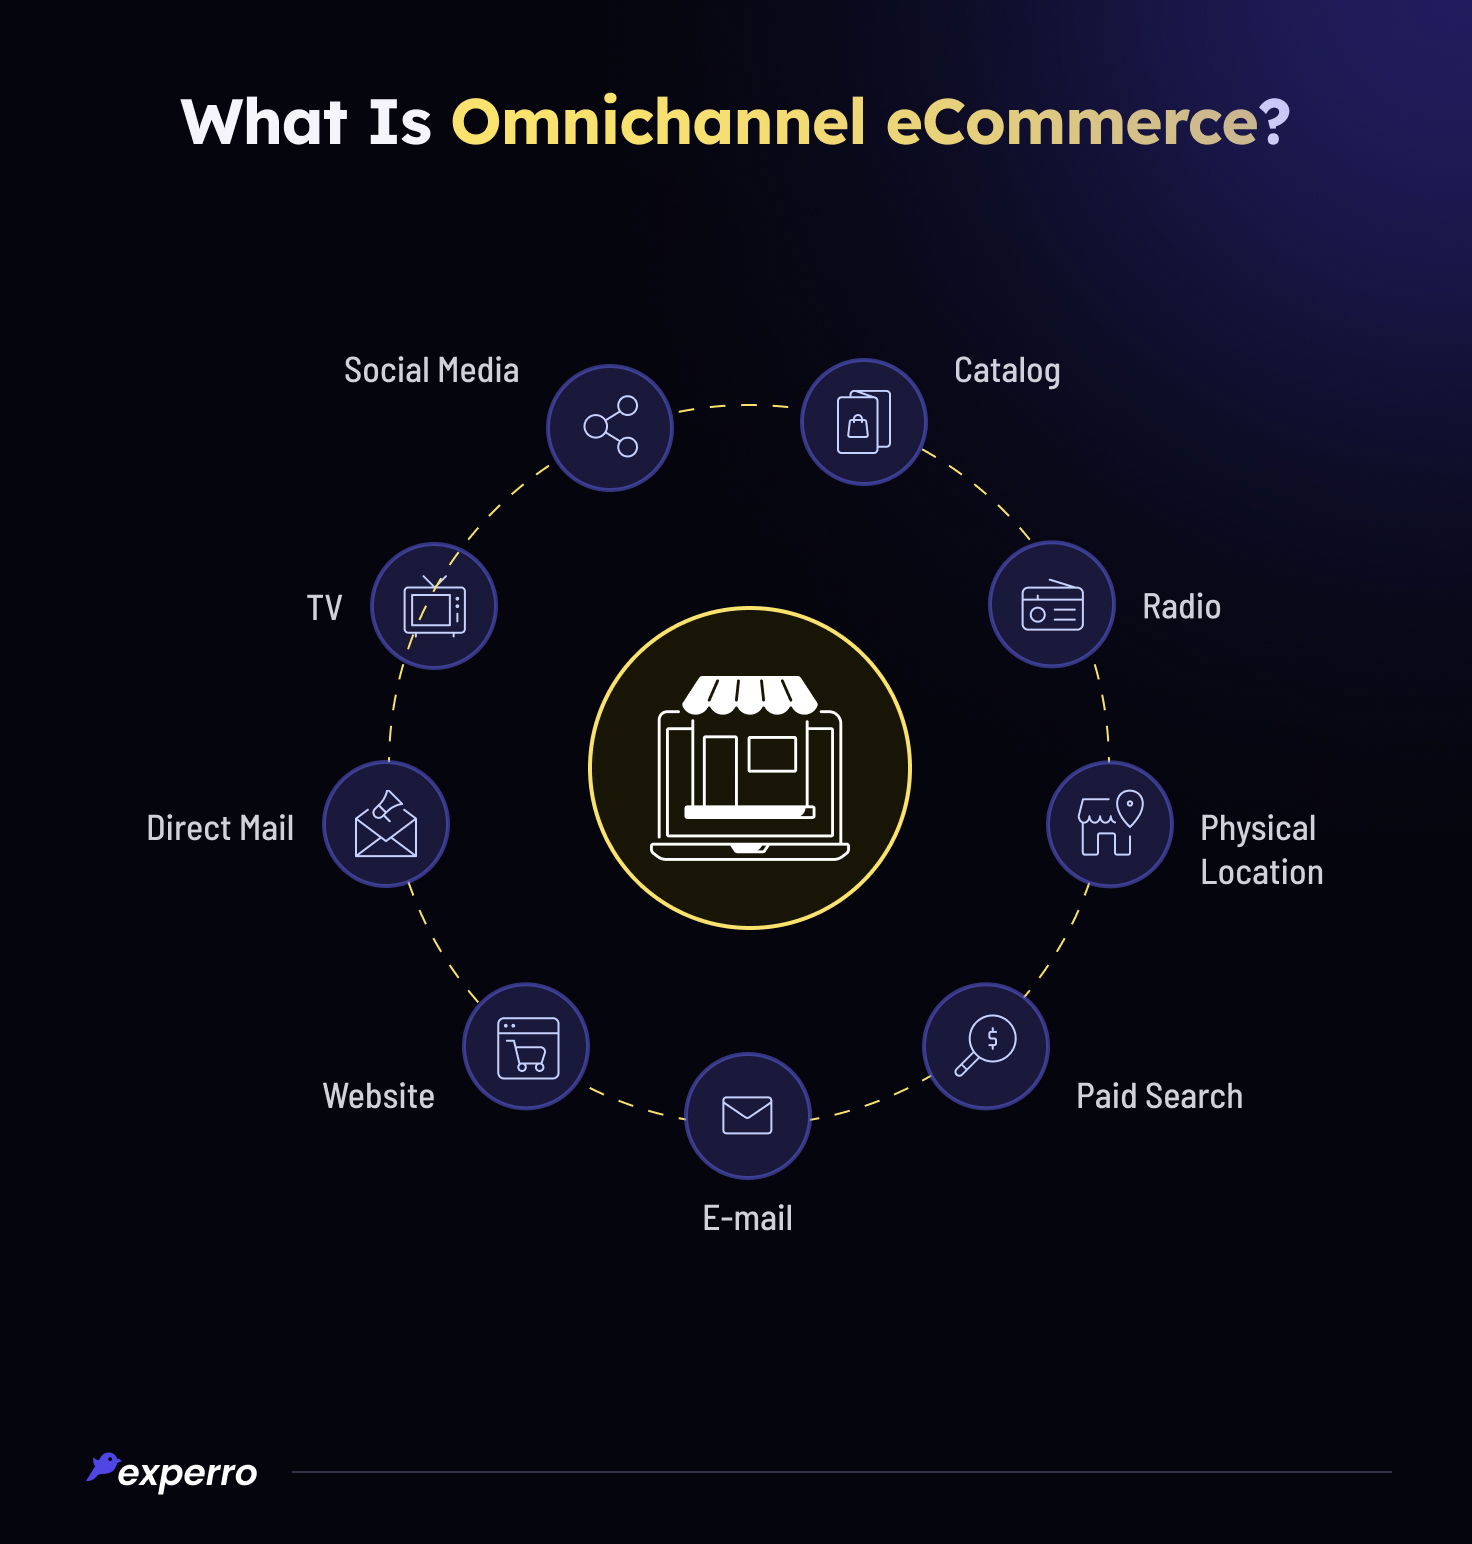 What is Omnichannel?